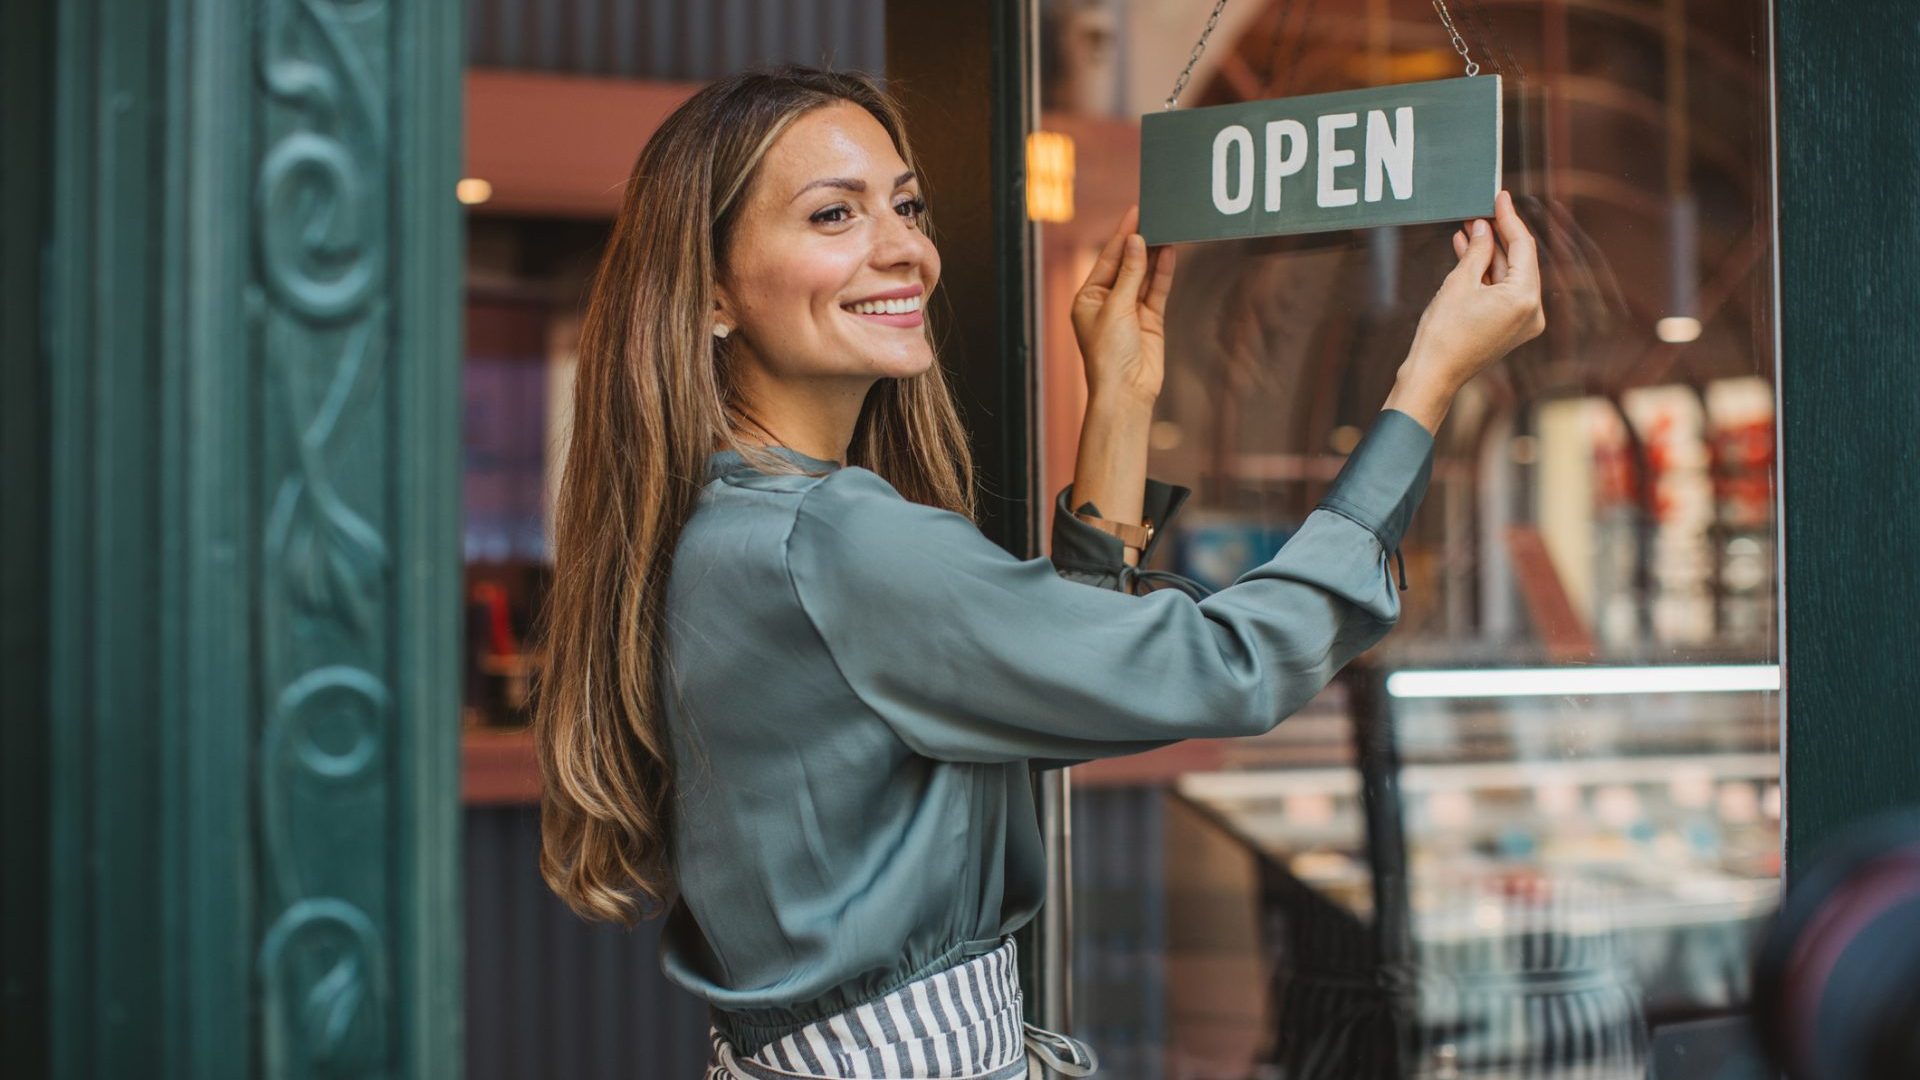 Small Business Thoughts: Should You Open a Brick-and-Mortar Store? - GOBankingRates